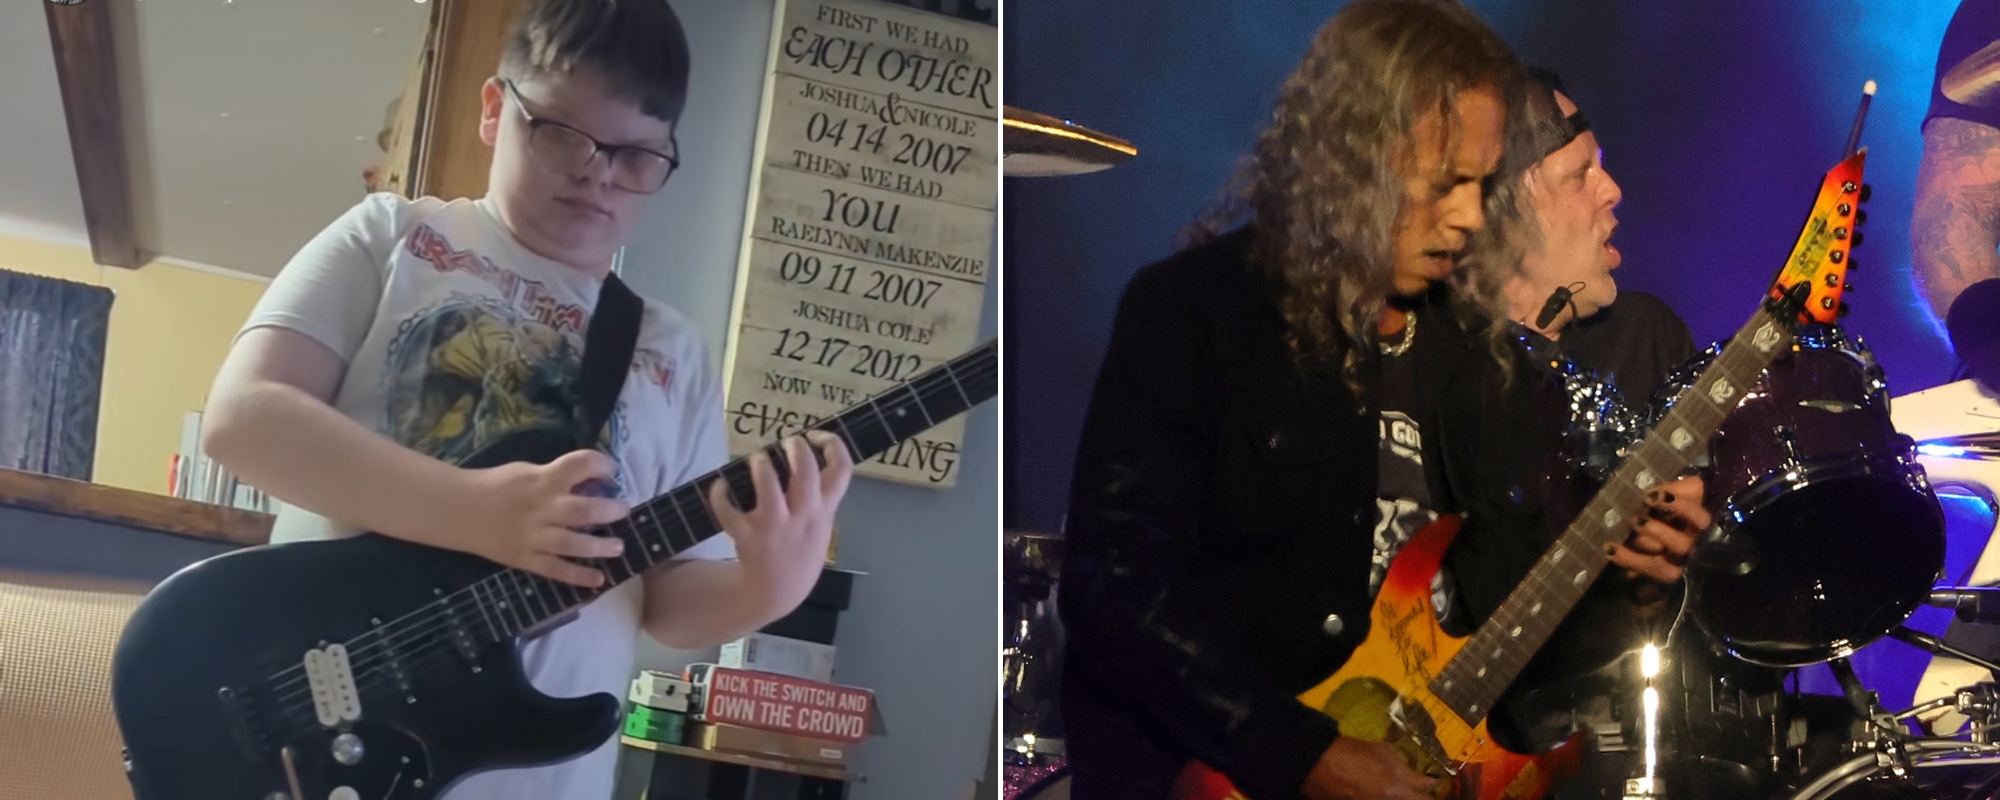 11-Year-Old Goes Viral For Metal Guitar Riffs: “This Is Like An Intro to Something Metallica Wrote”